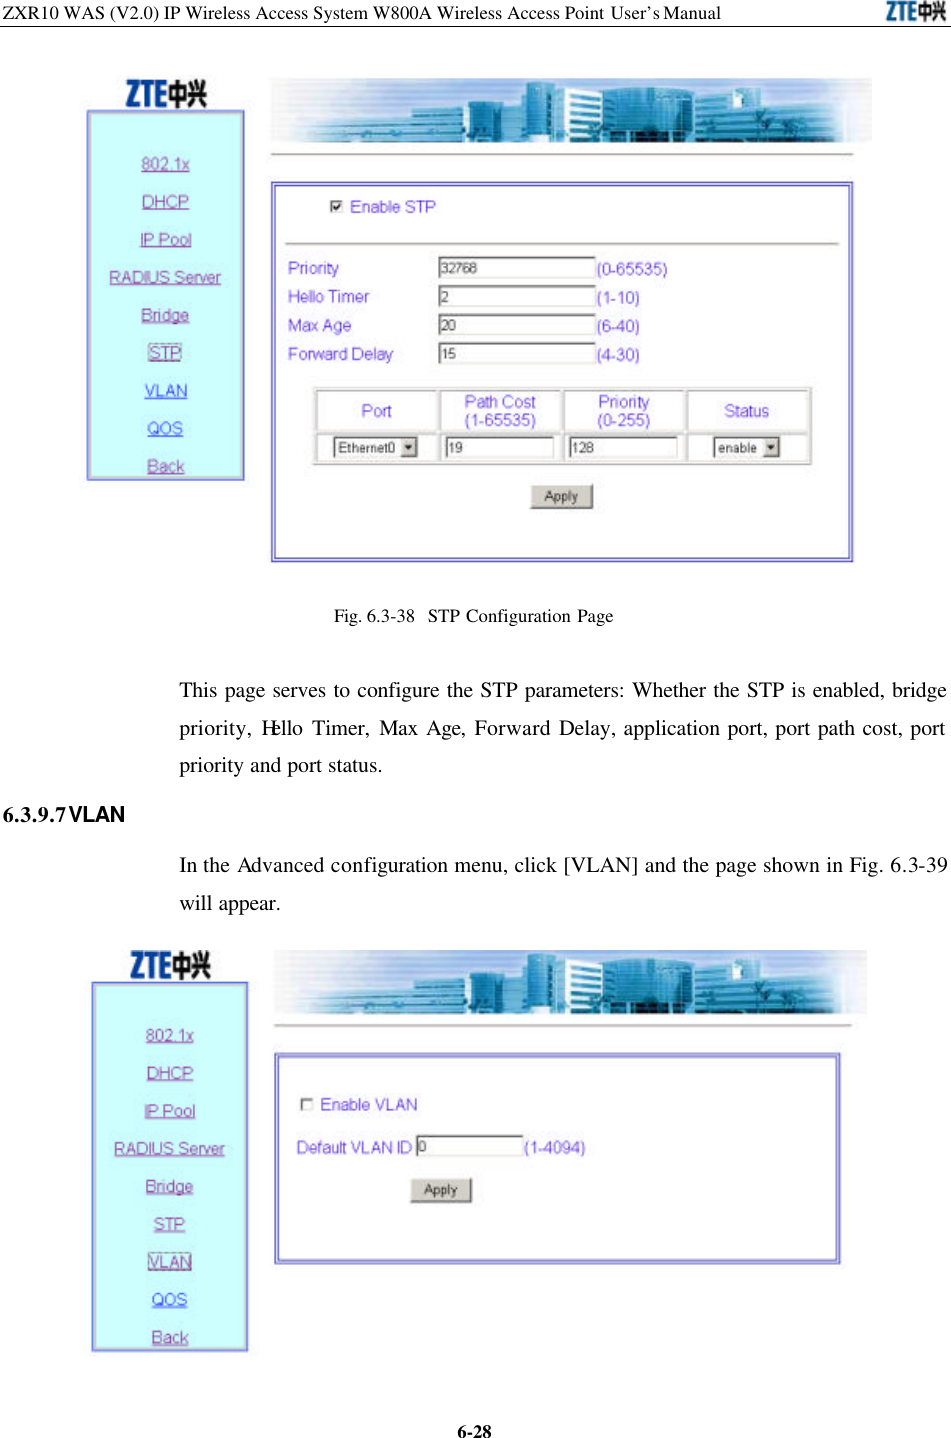 ZXR10 WAS (V2.0) IP Wireless Access System W800A Wireless Access Point User’s Manual  6-28 Fig. 6.3-38  STP Configuration Page   This page serves to configure the STP parameters: Whether the STP is enabled, bridge priority, Hello Timer, Max Age, Forward Delay, application port, port path cost, port priority and port status.   6.3.9.7 VLAN In the Advanced configuration menu, click [VLAN] and the page shown in Fig. 6.3-39 will appear.    